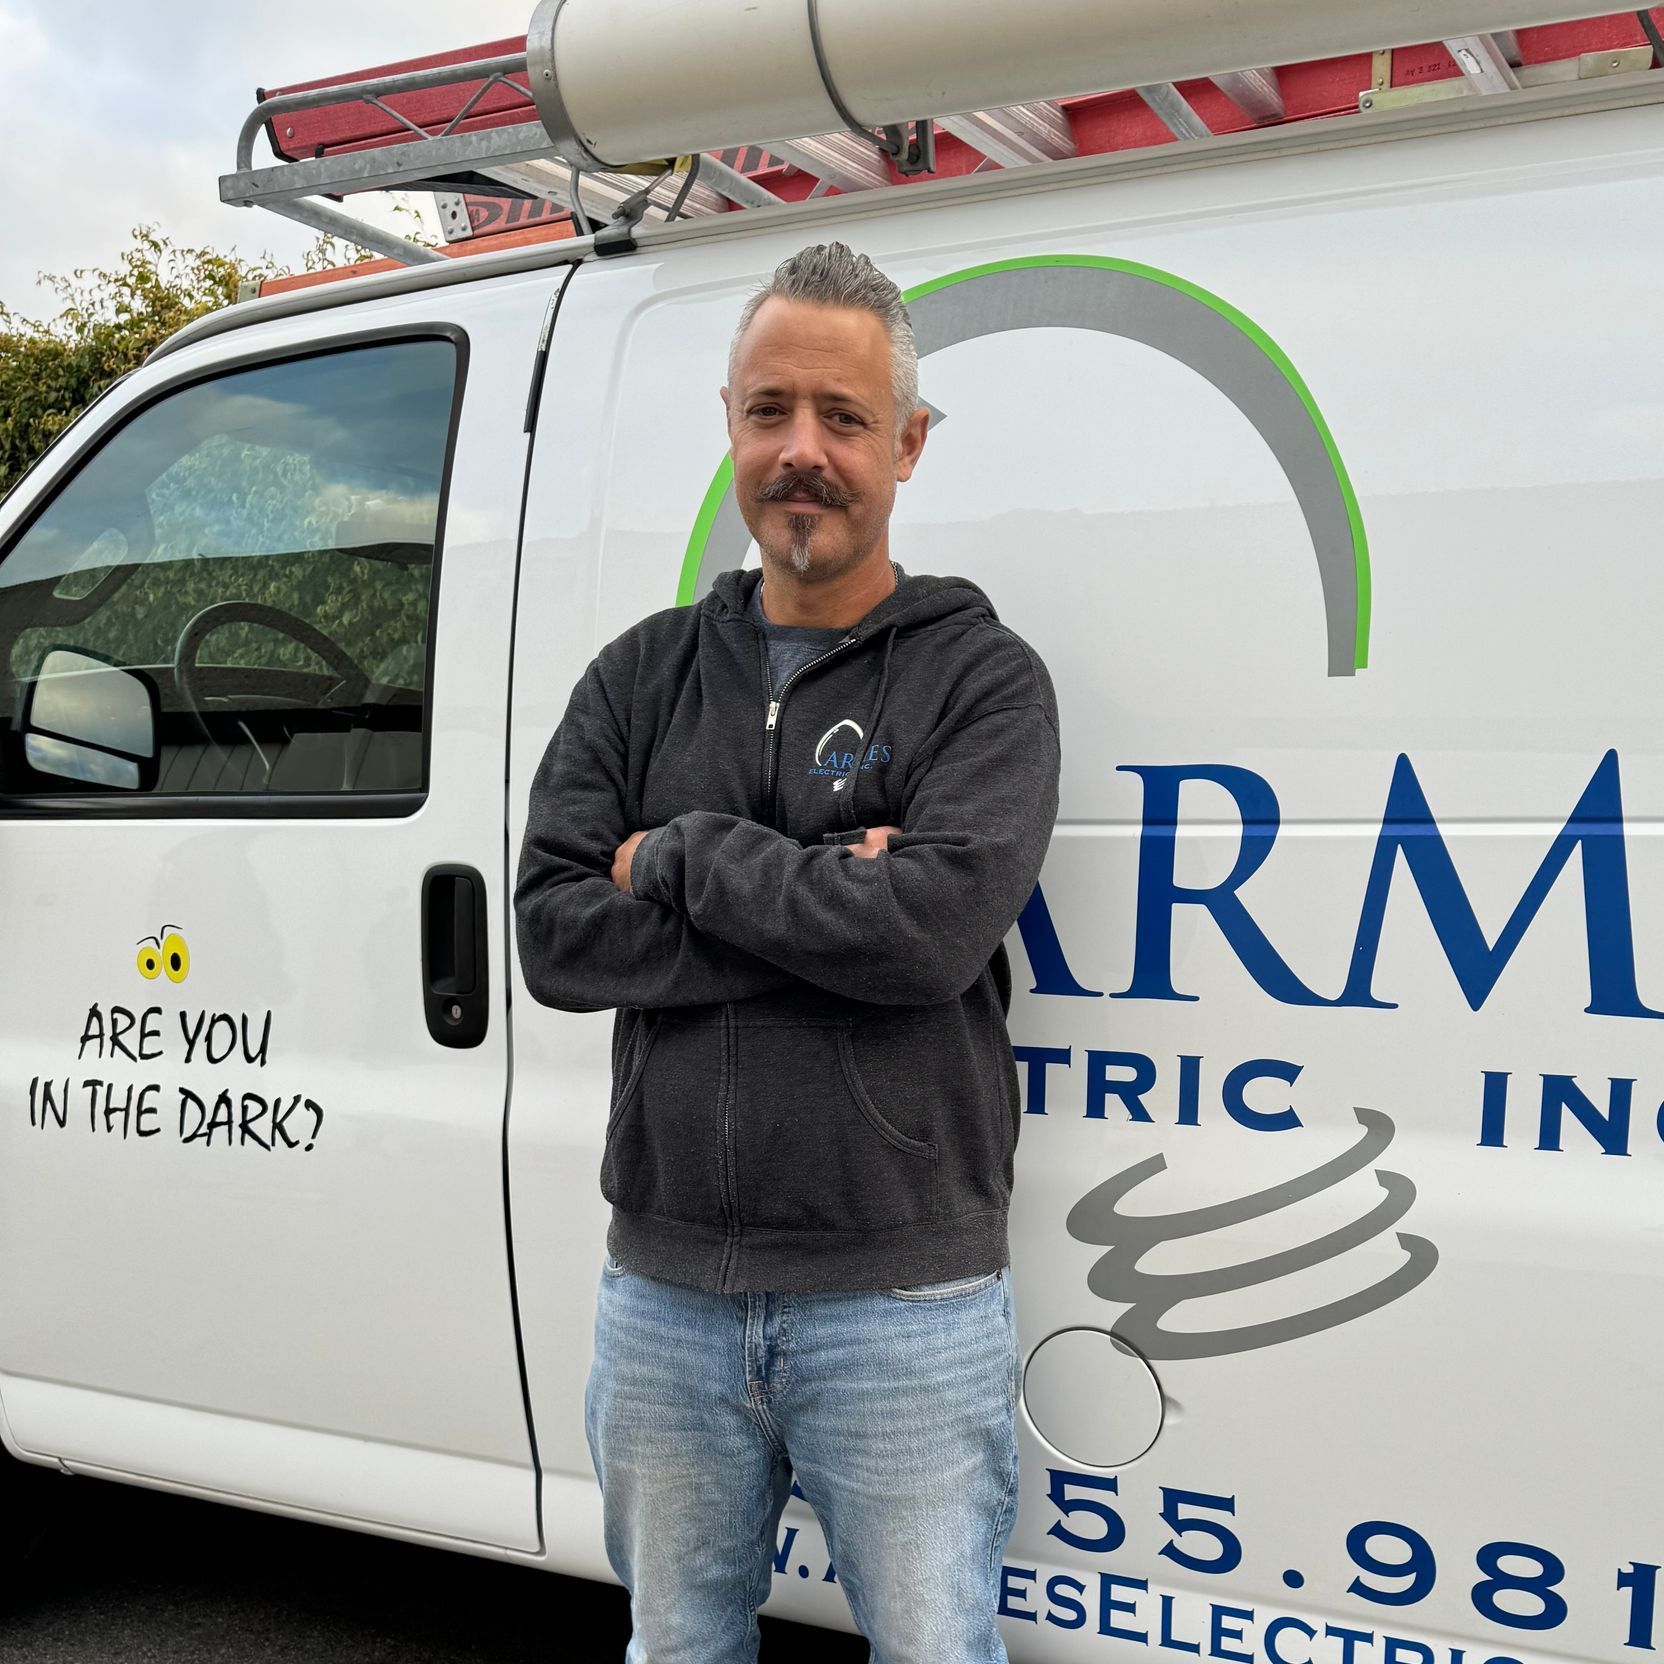 a man stands in front of an arm electric van